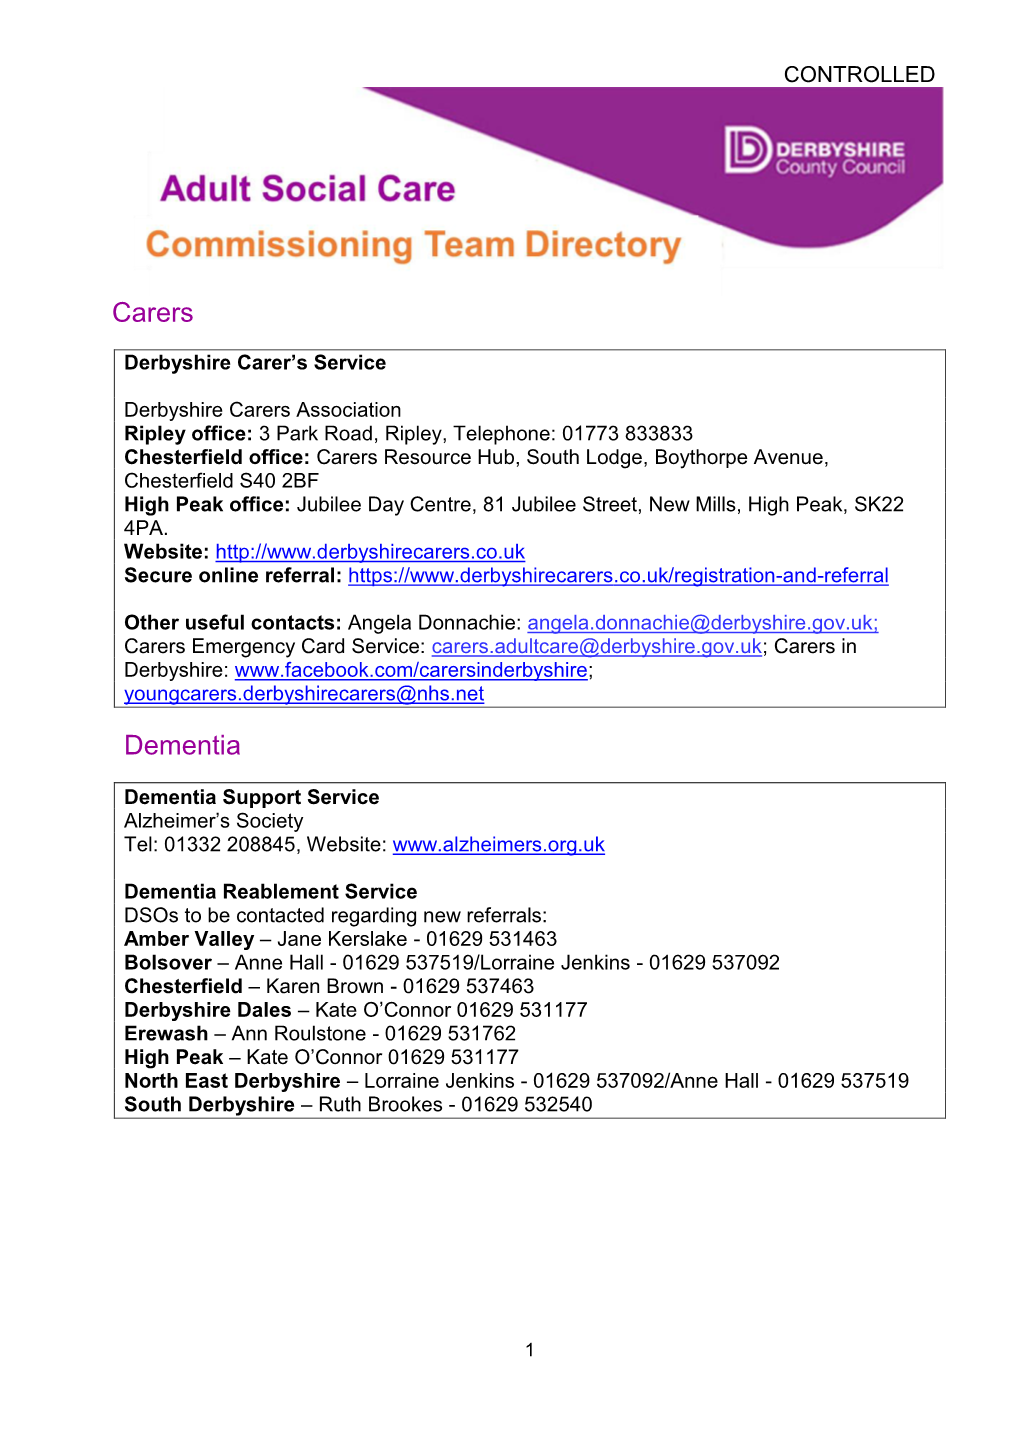 Adult Care Directory of Commissioned Services